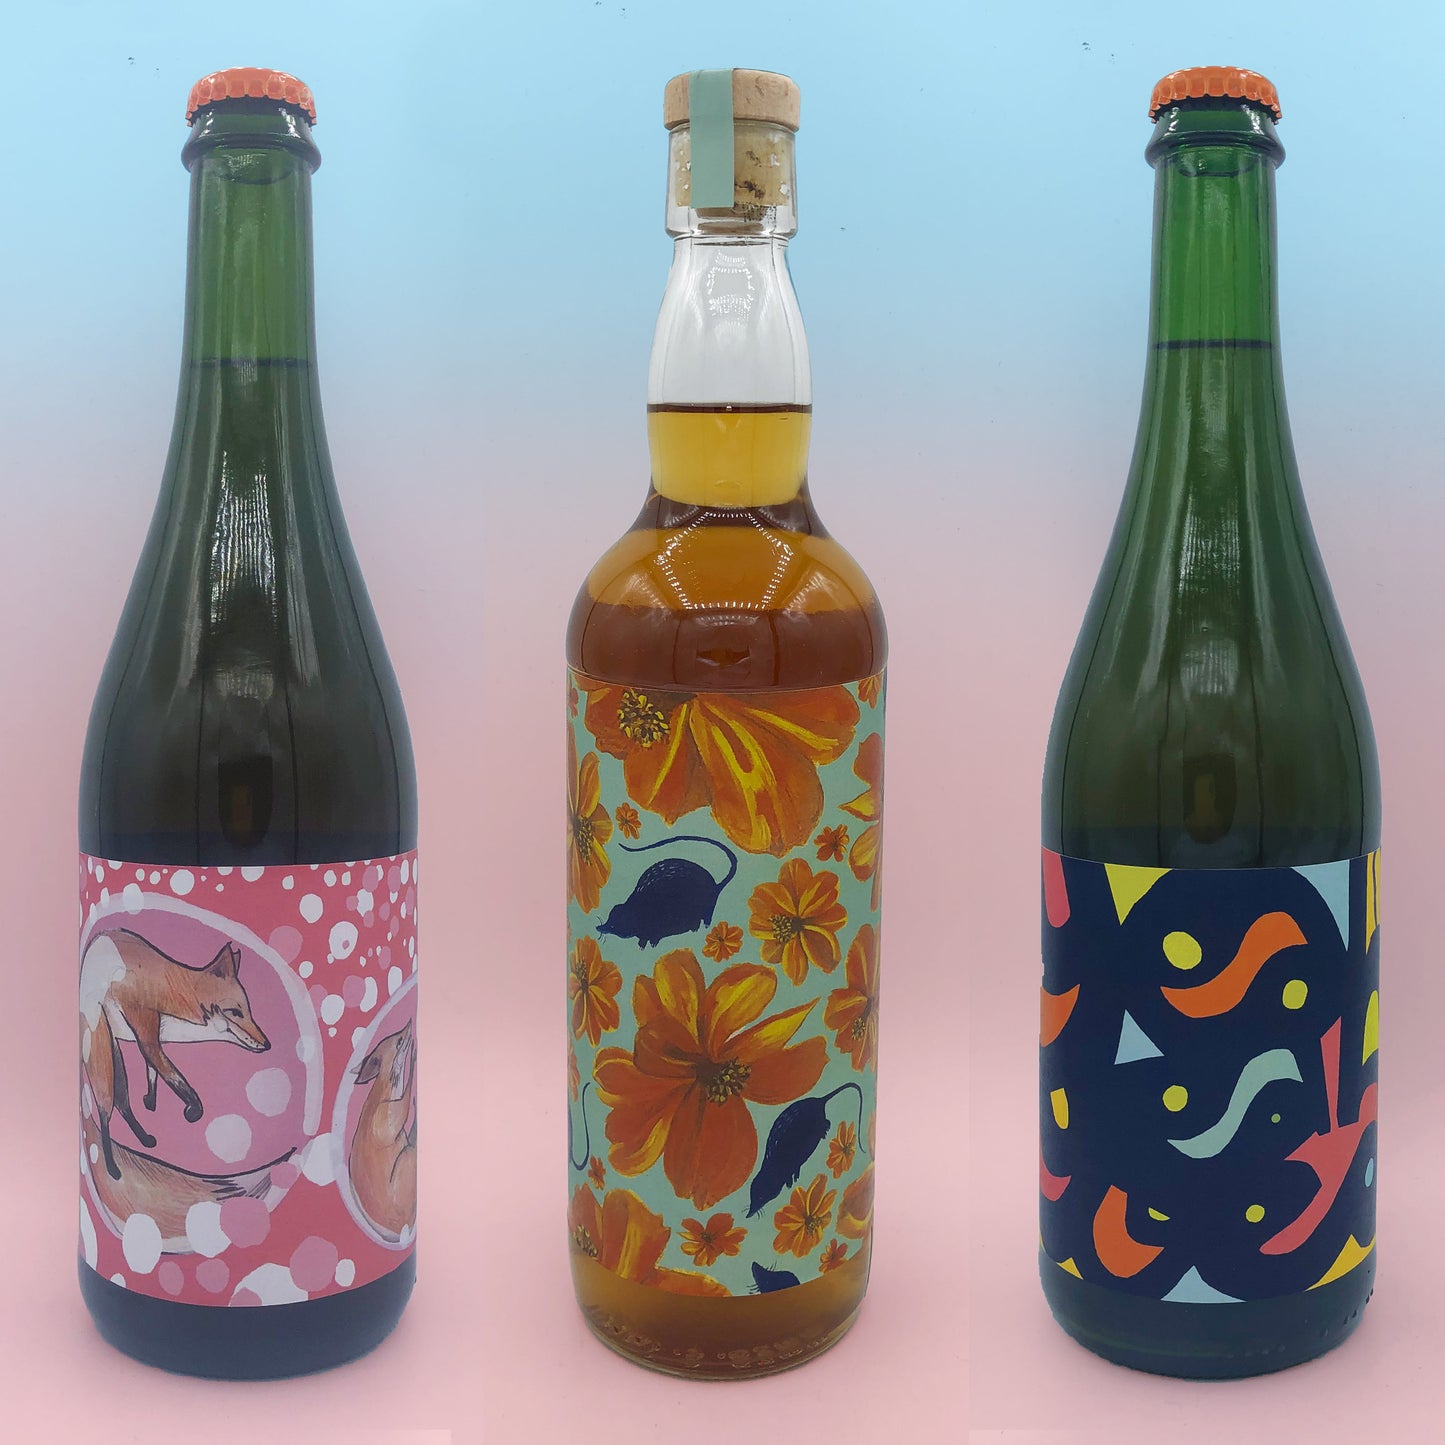 A naturally sweet mix (2x 75cl ciders, 1x 70cl pommeau)